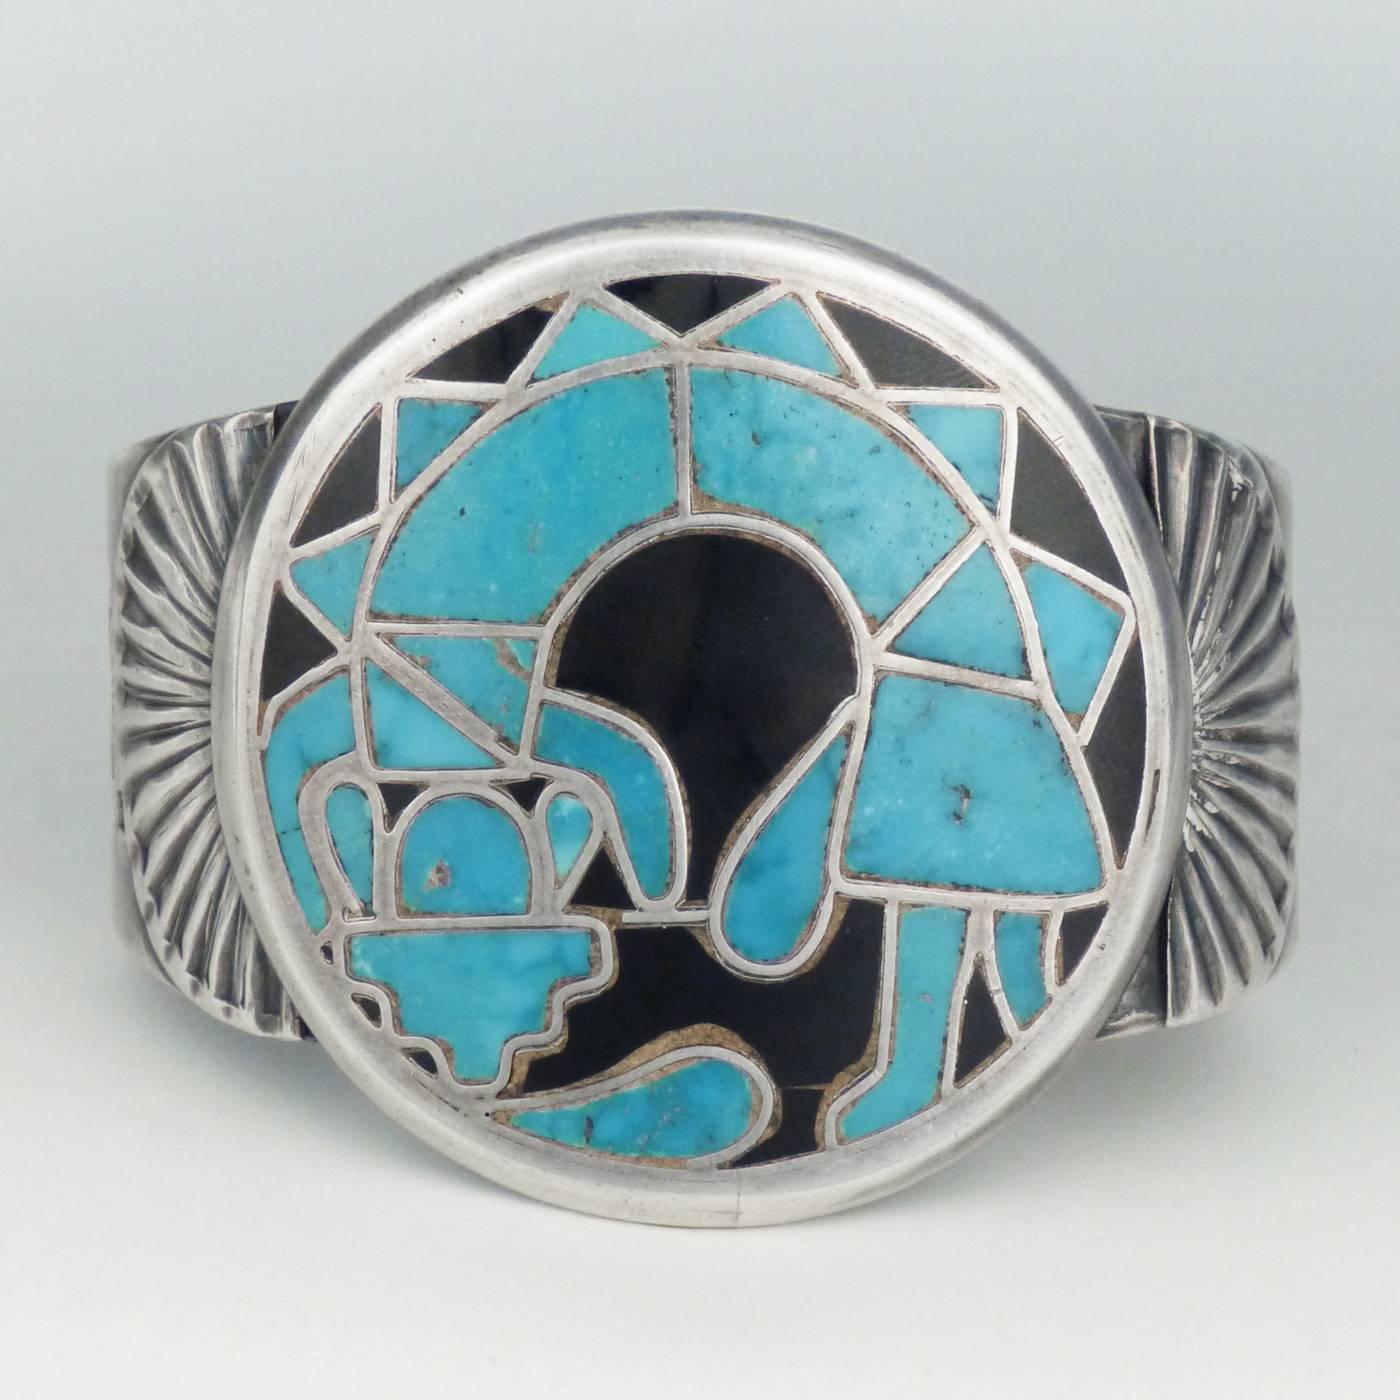 An exquisite example of mid-20th Century Zuni inlay, this set features a cuff, a brooch, screw-back earrings and a ring. Unsigned, but attributed to Zuni inlay master Dan Simplicio. Made during at the high point of Zuni inlay at the trading post